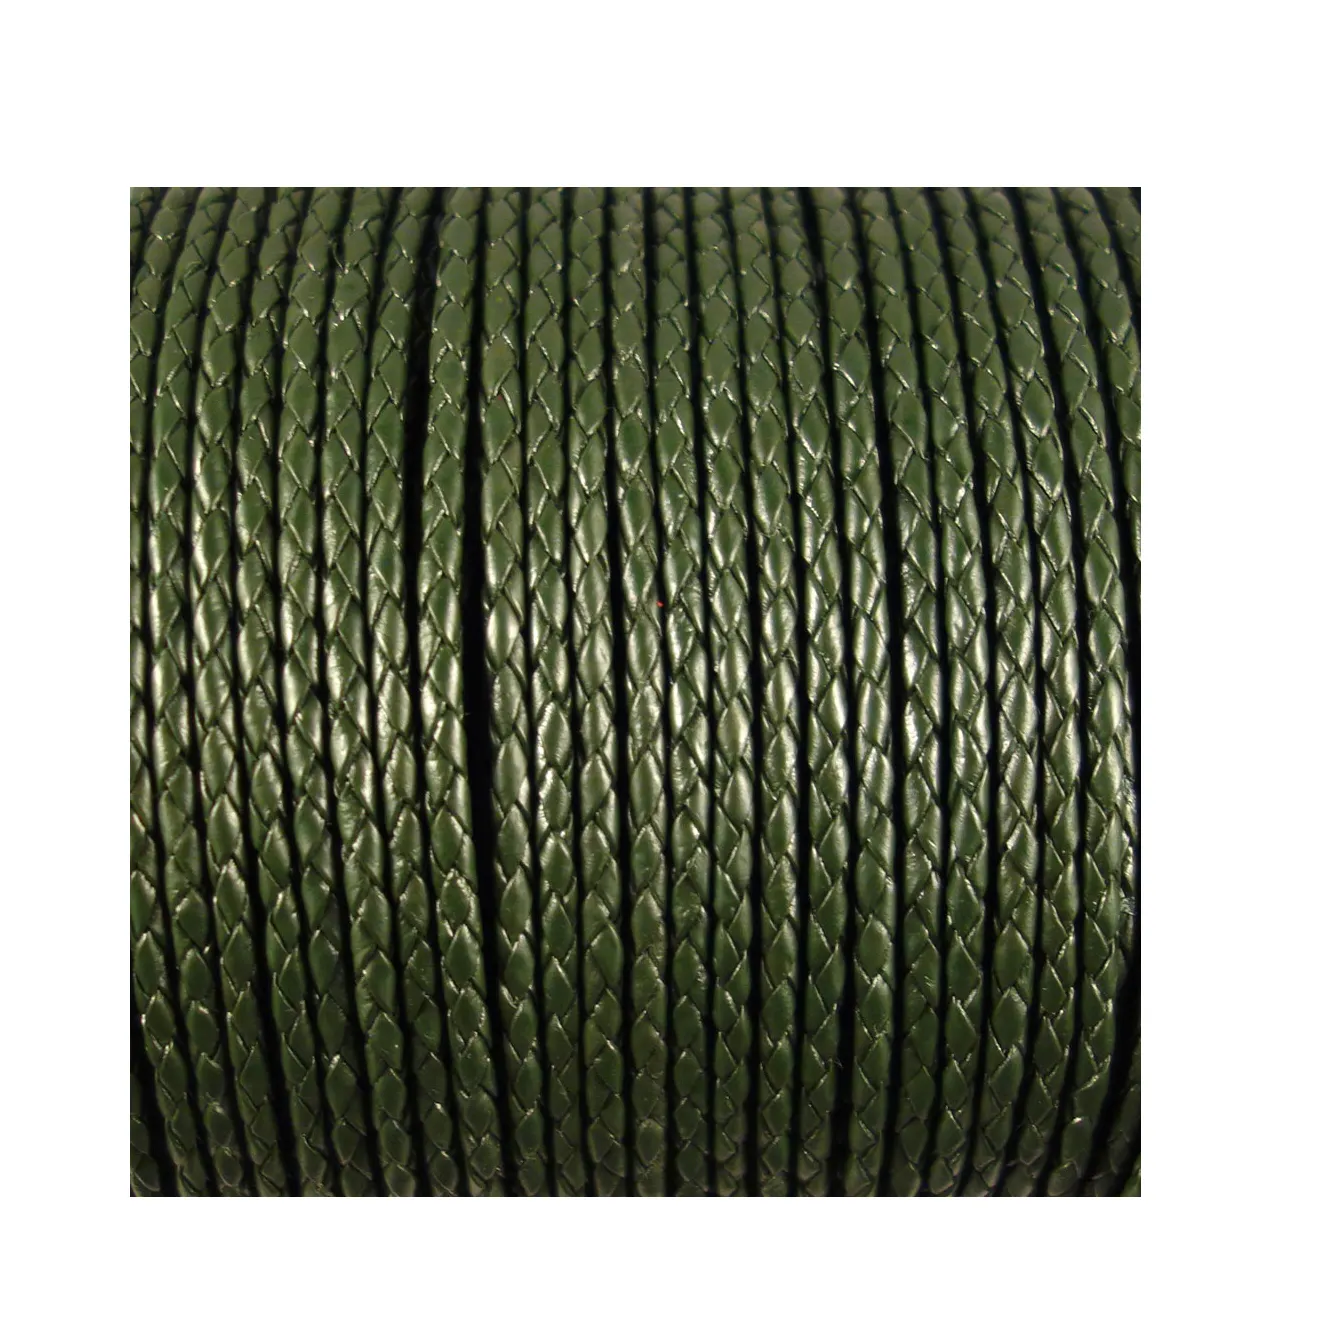 Latest hot sale 4mm 4 Ply Round Braided Leather Cords, Bolo Cord for making jewelry accessories & Craft Work